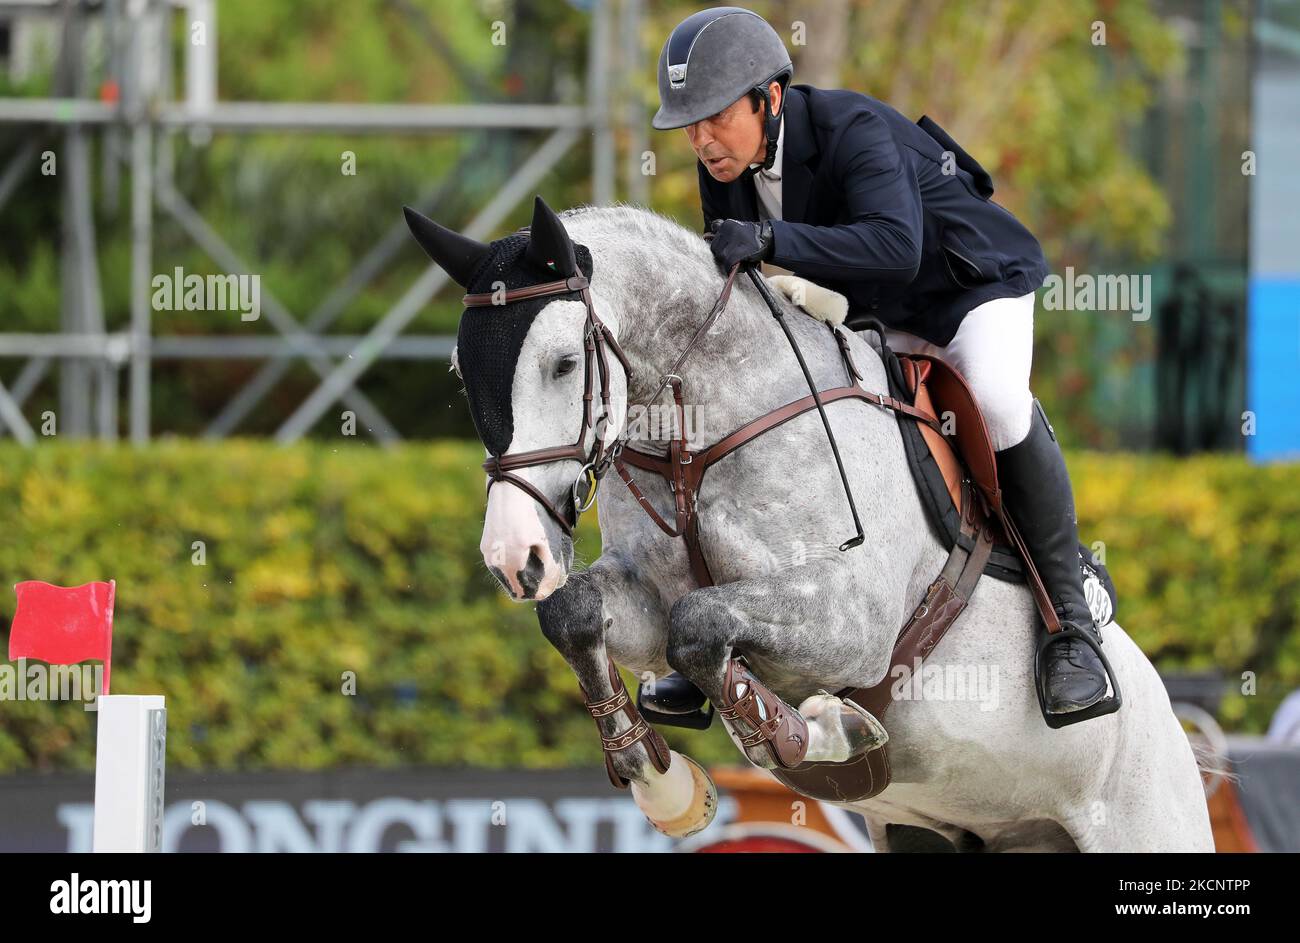 Jesus Garmendia Echevarria riding Callias during the Copa Negrita, corresponding to the 109th edition of the Longines FEI Jumping Nations Cup Jumping Final, held at the Polo Club on 01st October 2021, in Barcelona, Spain. (Photo by Joan Valls/Urbanandsport/NurPhoto) Stock Photo